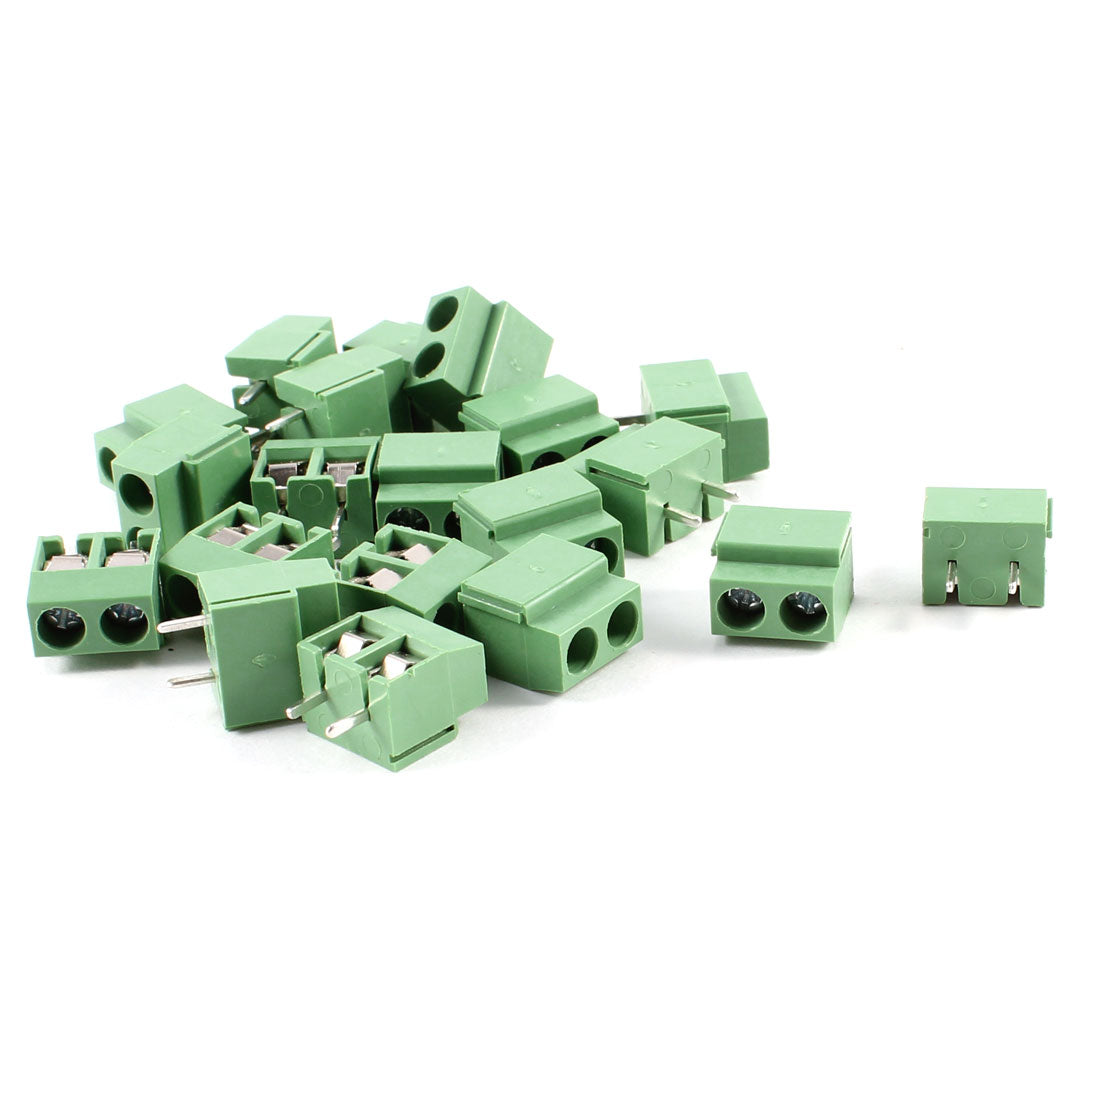 uxcell Uxcell 20Pcs 2 Pole 5mm Pitch PCB Mount Screw Terminal Block 8A 250V